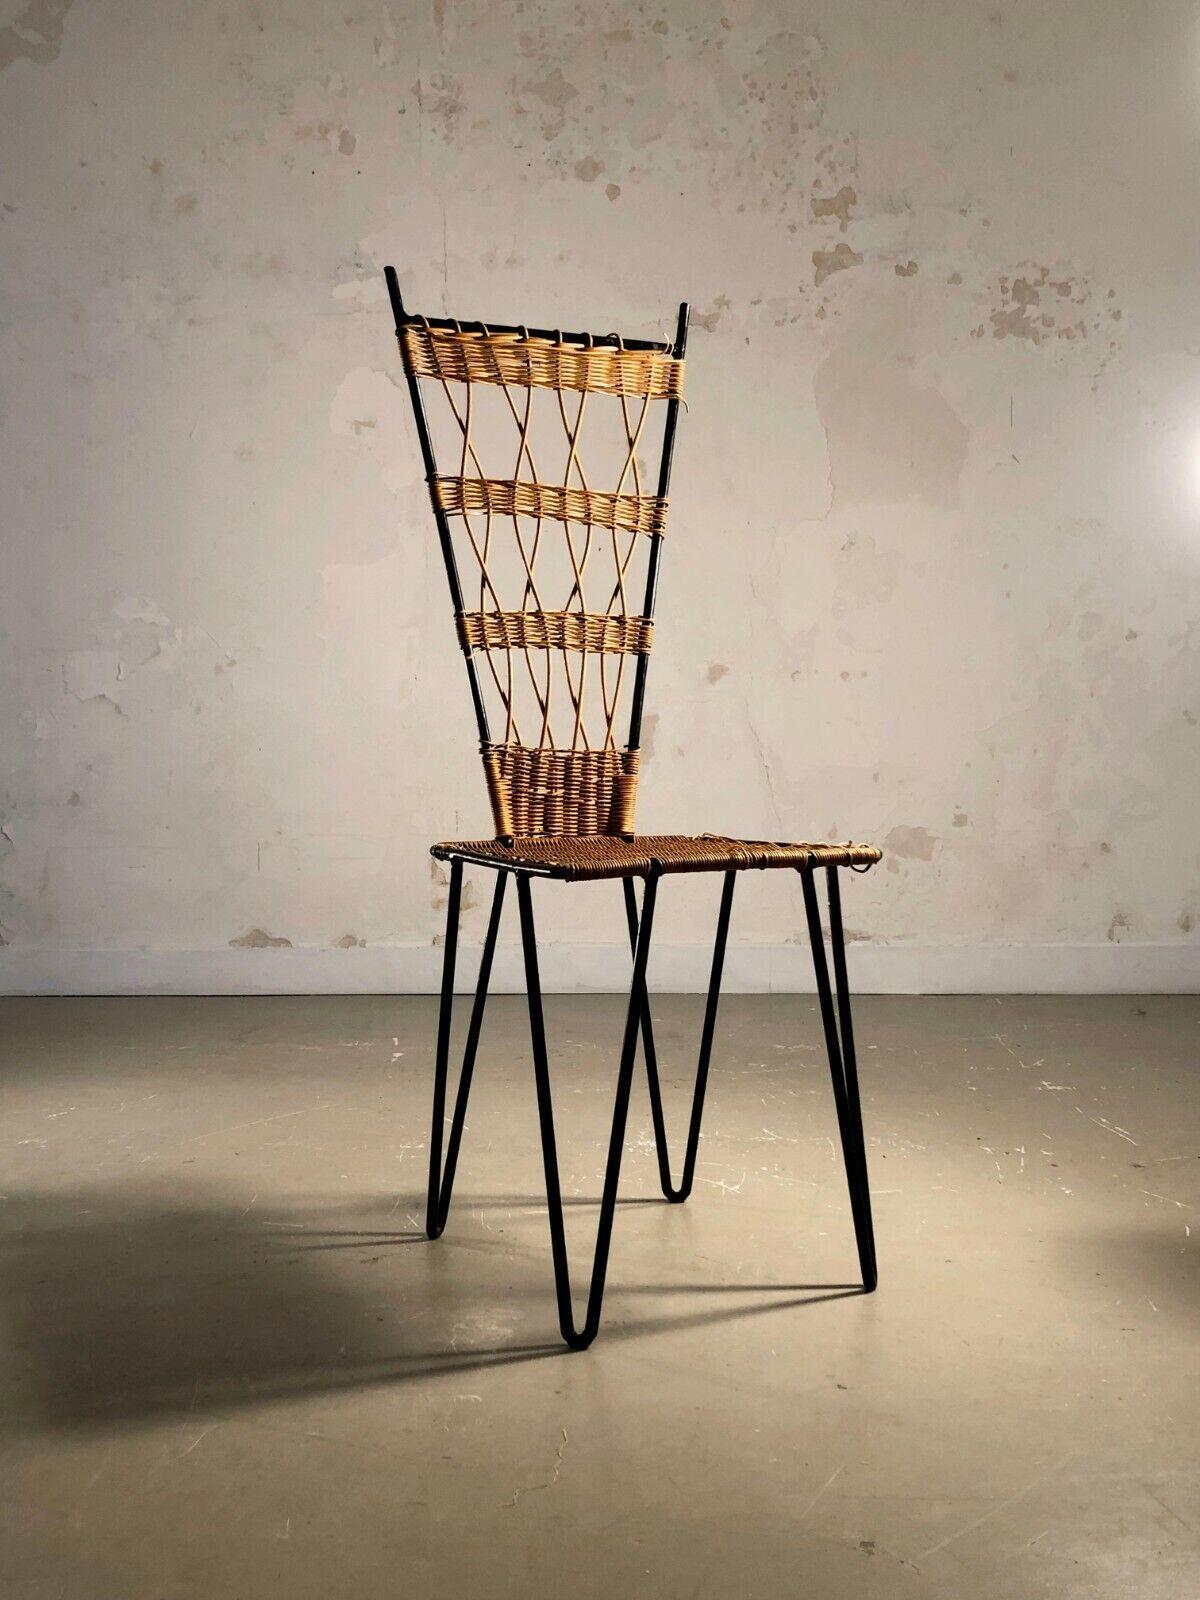 A spectacular chair of tribal inspiration, Modernist, Brutalist, Popular Art, Free Form, black lacquered metal structure, seat and back with graphic openwork rattan decorations, by Raoul Guys, France 1950-1960.